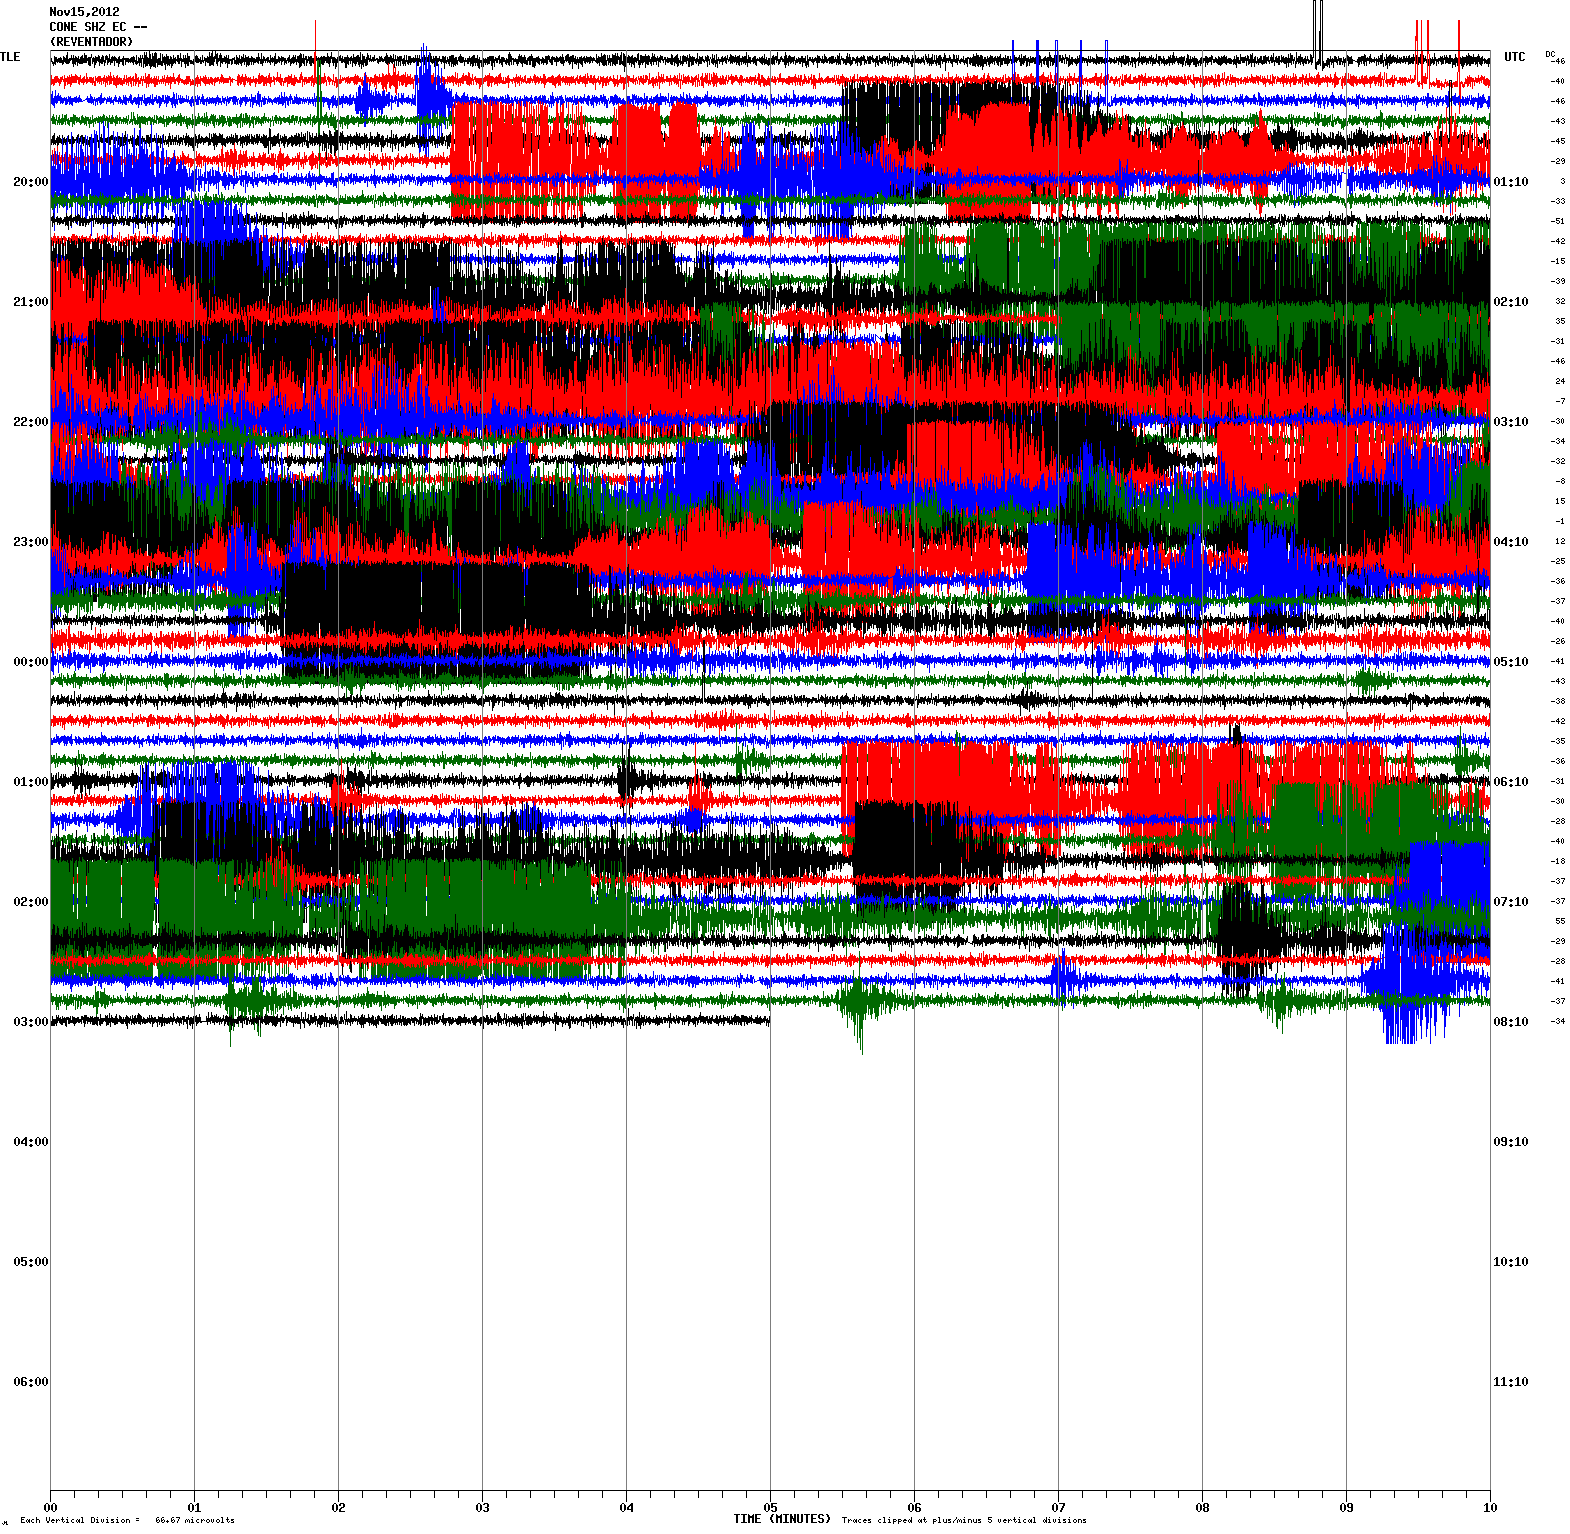 Current seismic signal (CONE station) showing tremor and activity from rockfalls and small quakes (IG)